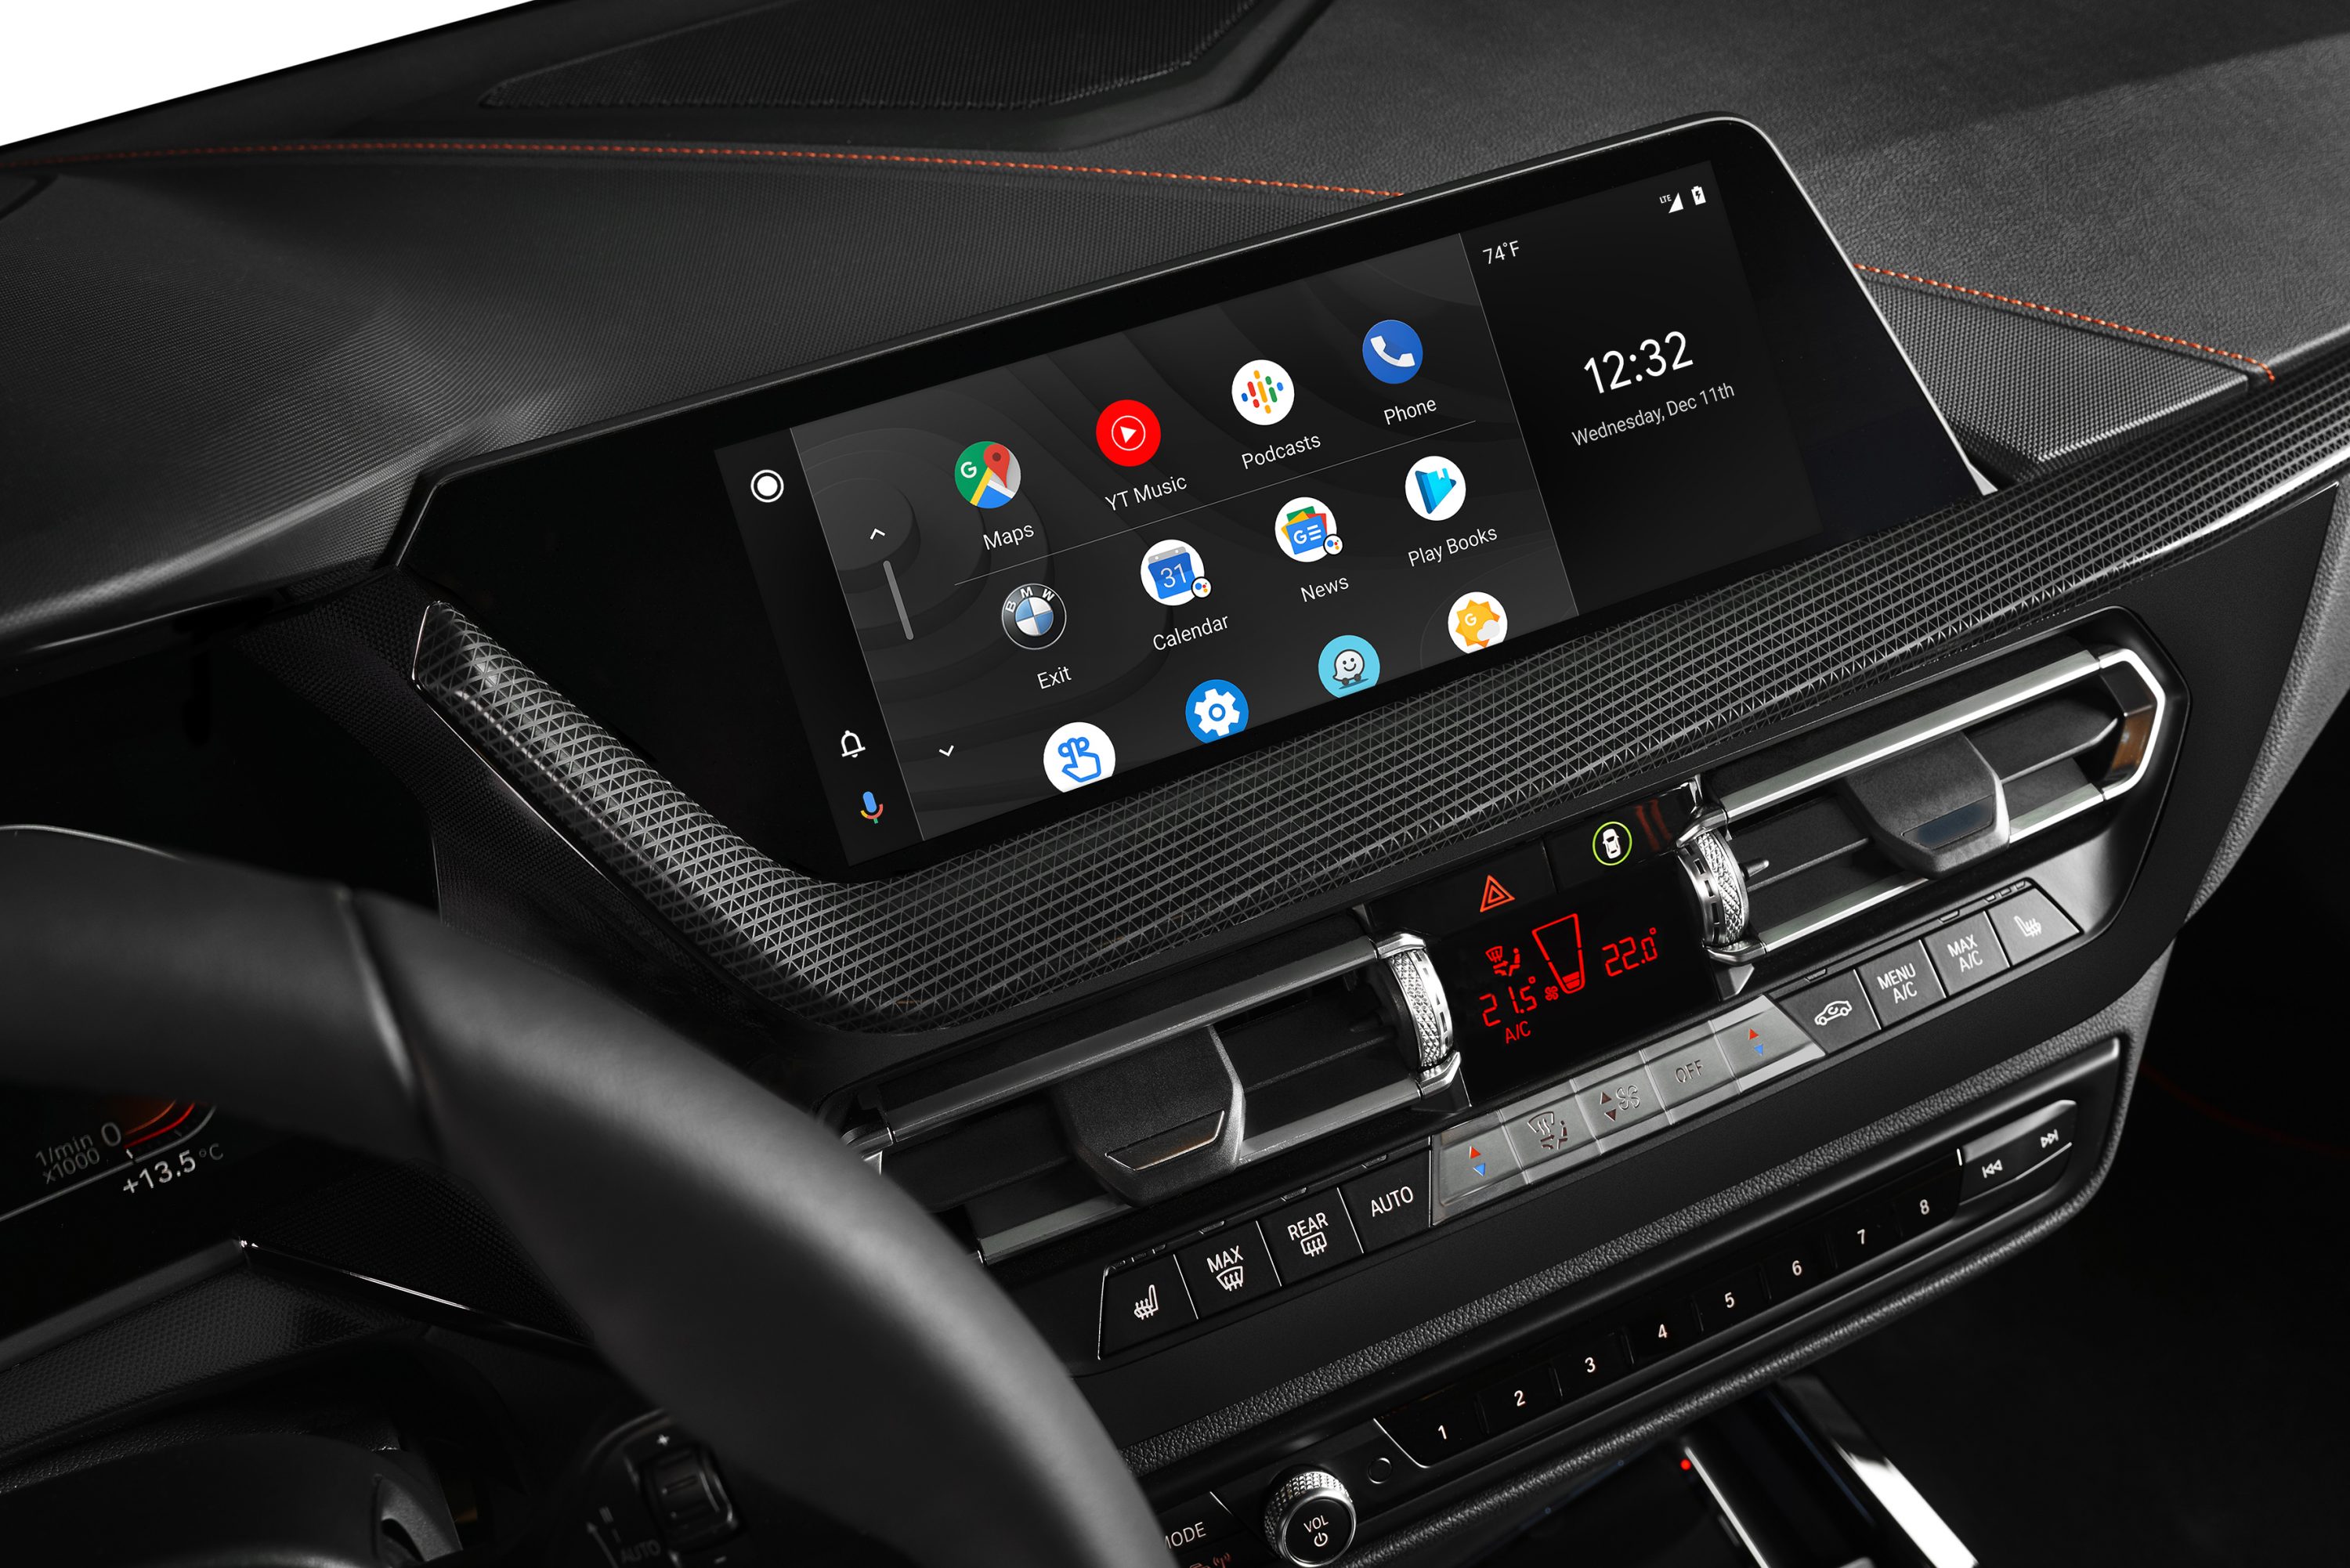 Does your new car support wireless Android Auto?